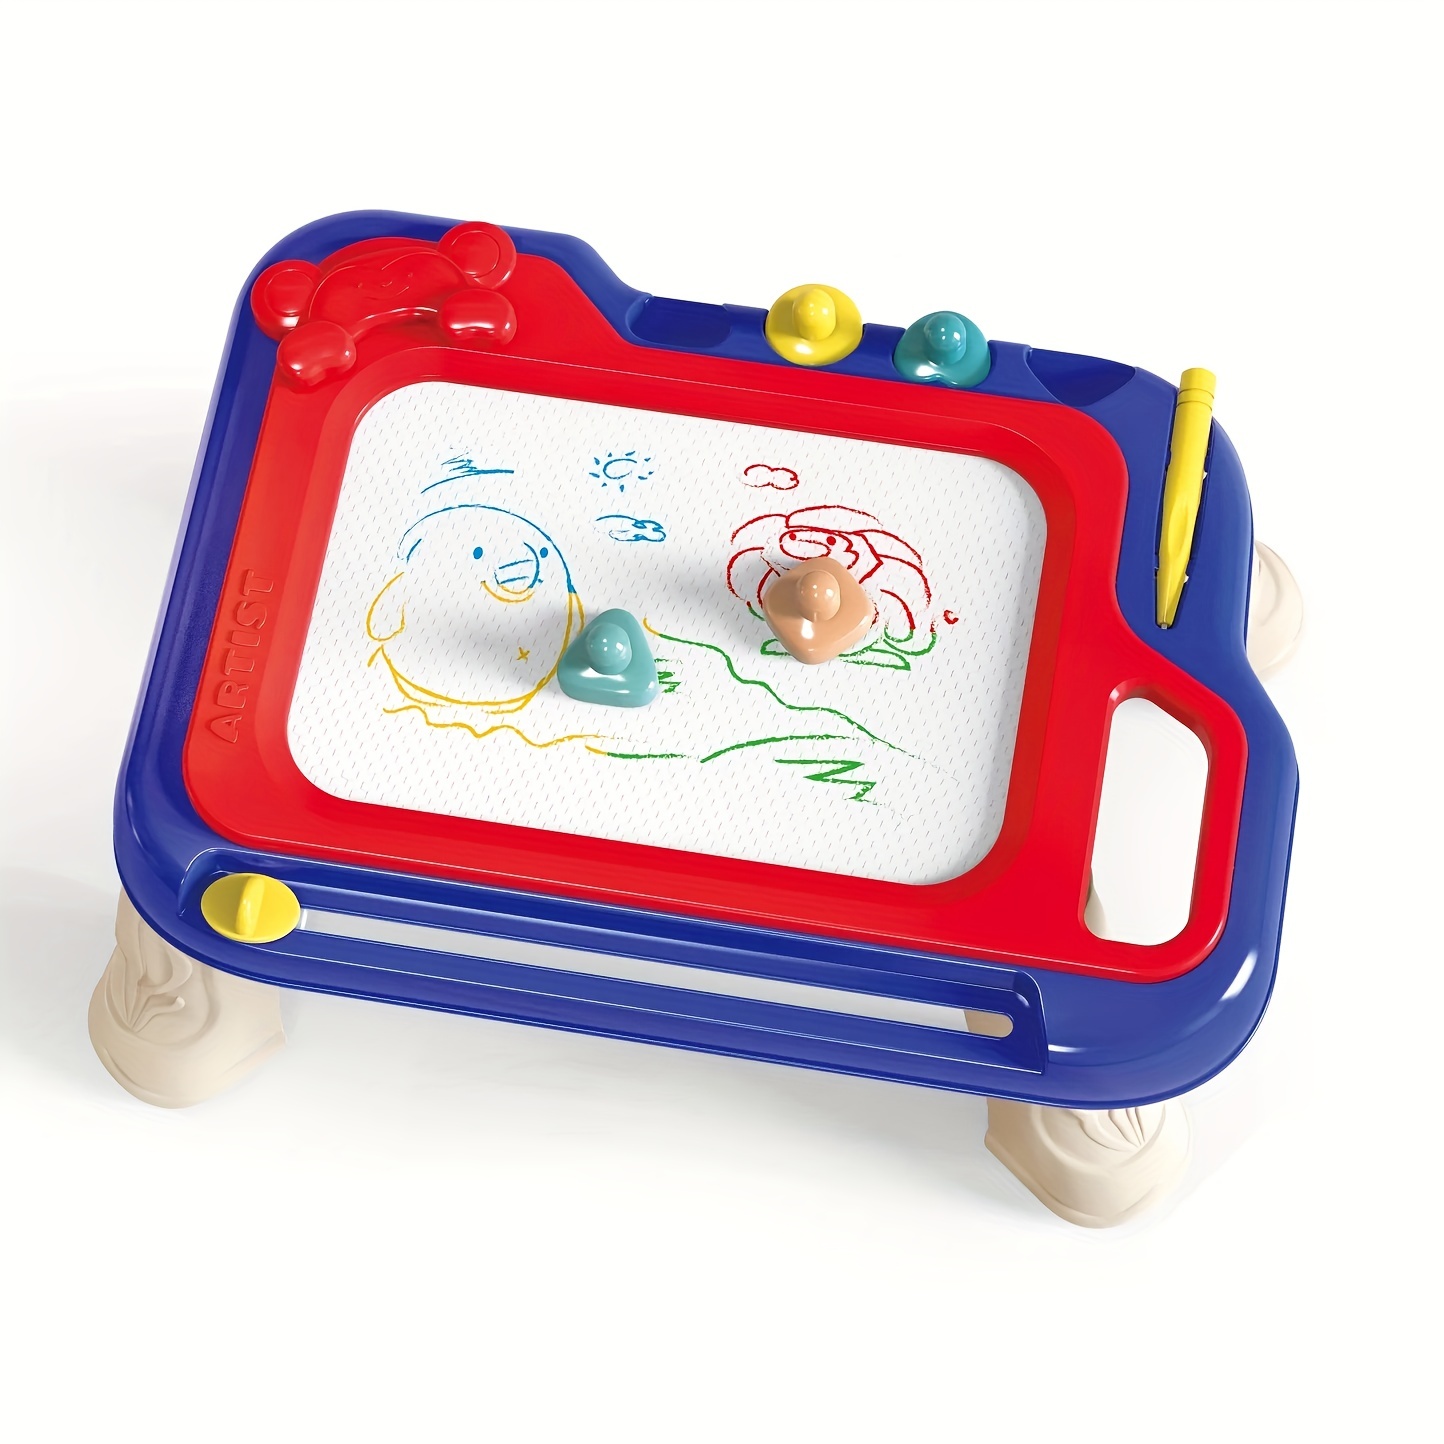 Magnetic Drawing Easel